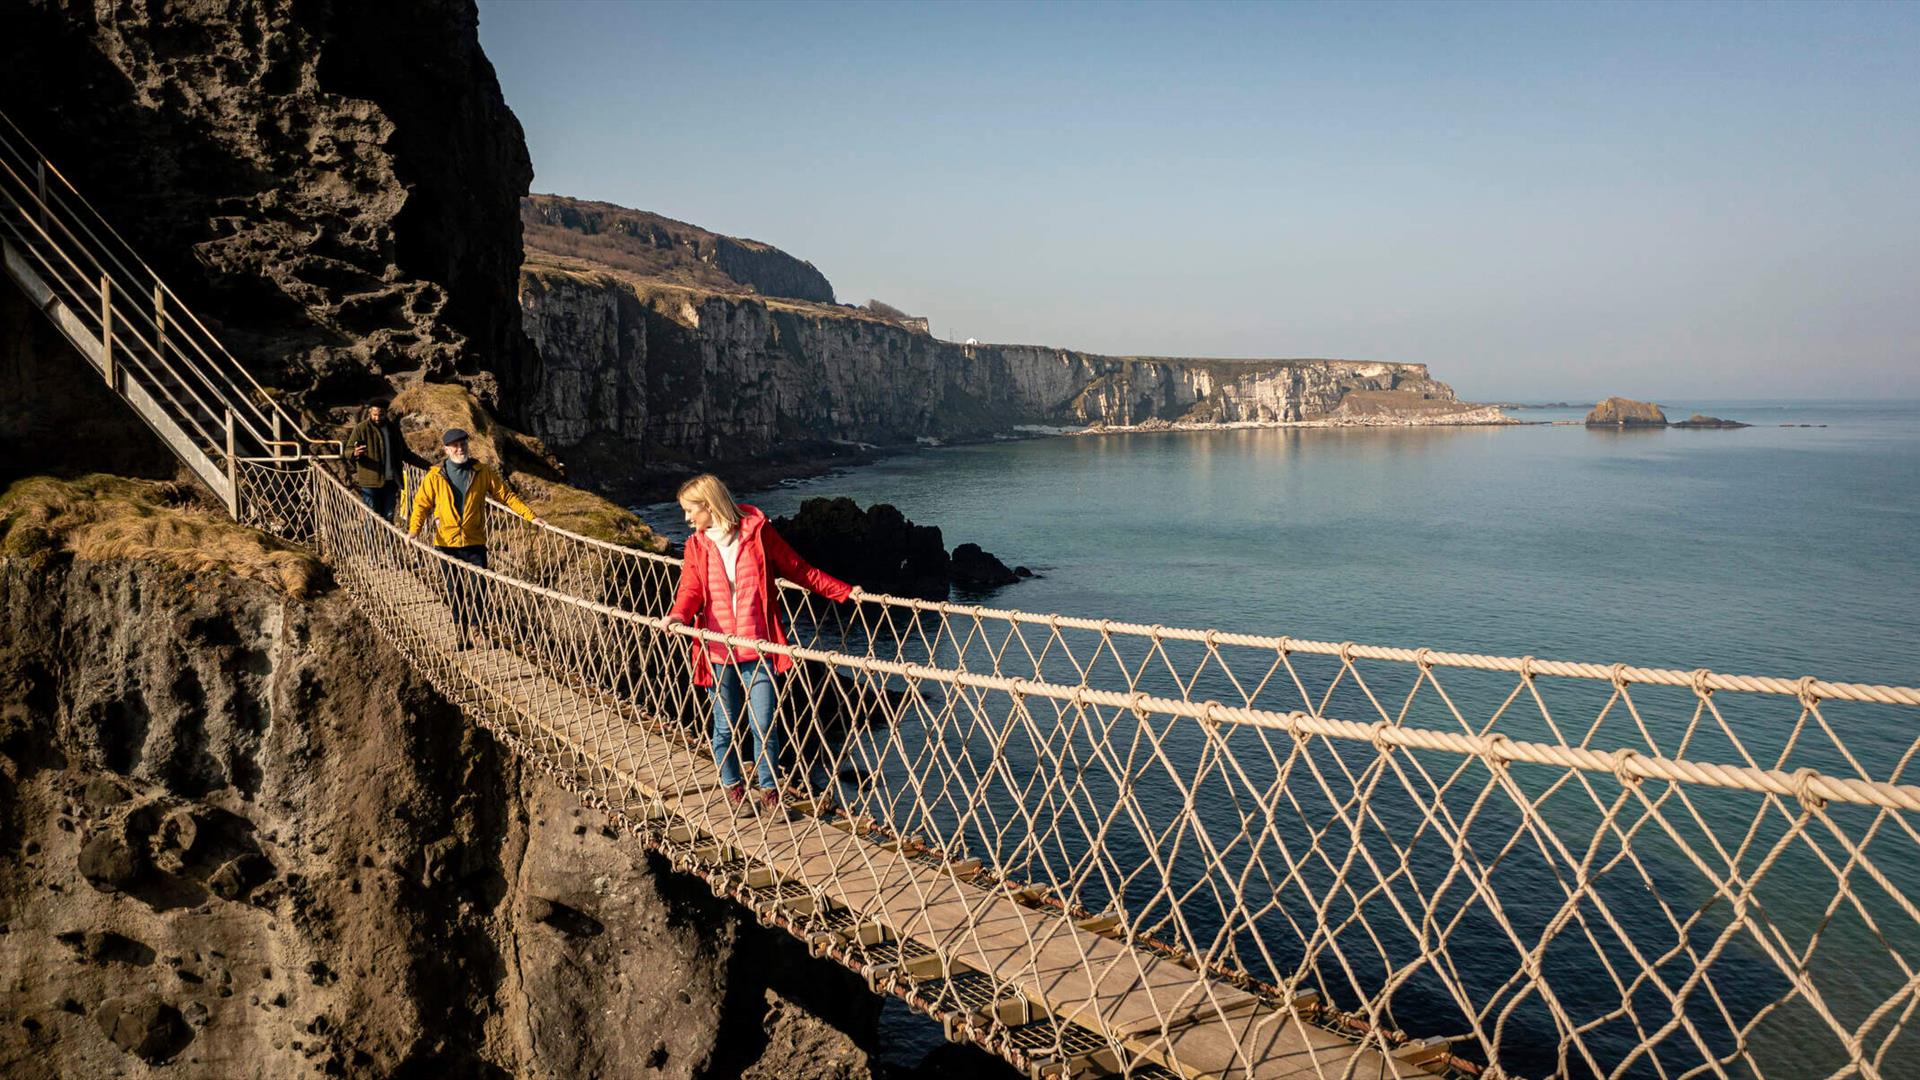 People cross the carrick-a-rede rope bridge and admire the views as they go